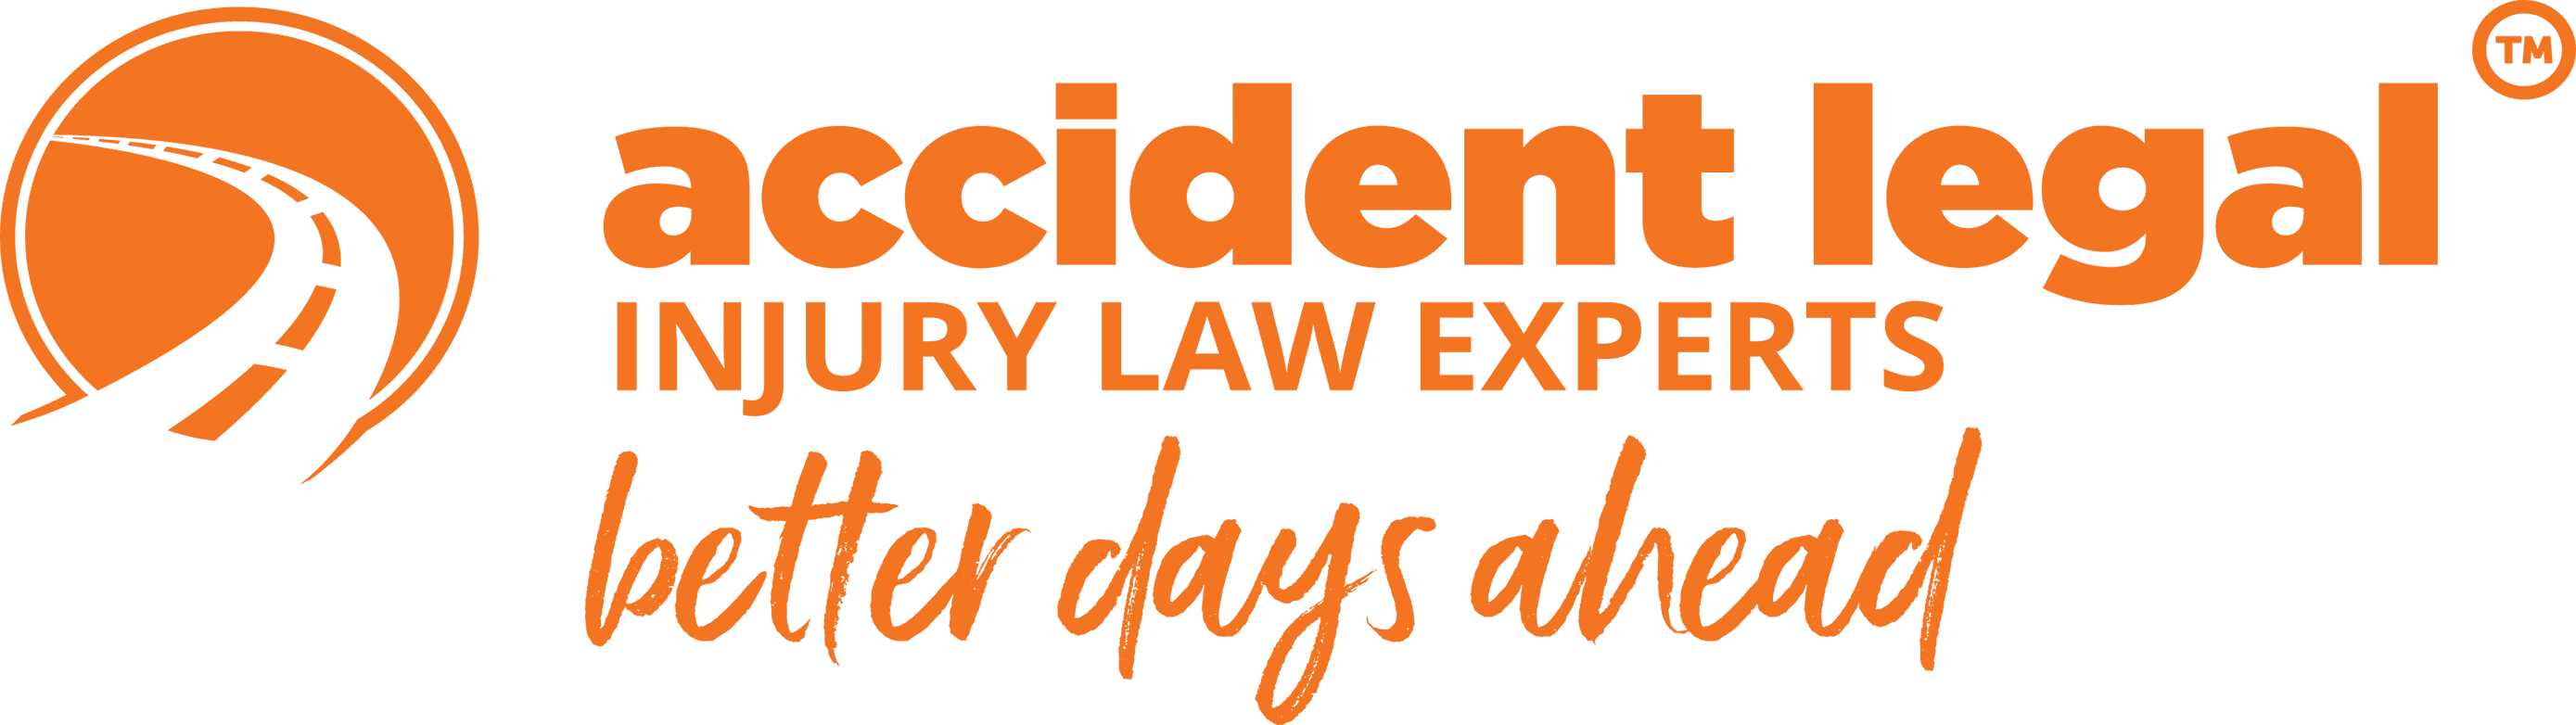 Accident Legal™ - Better days ahead